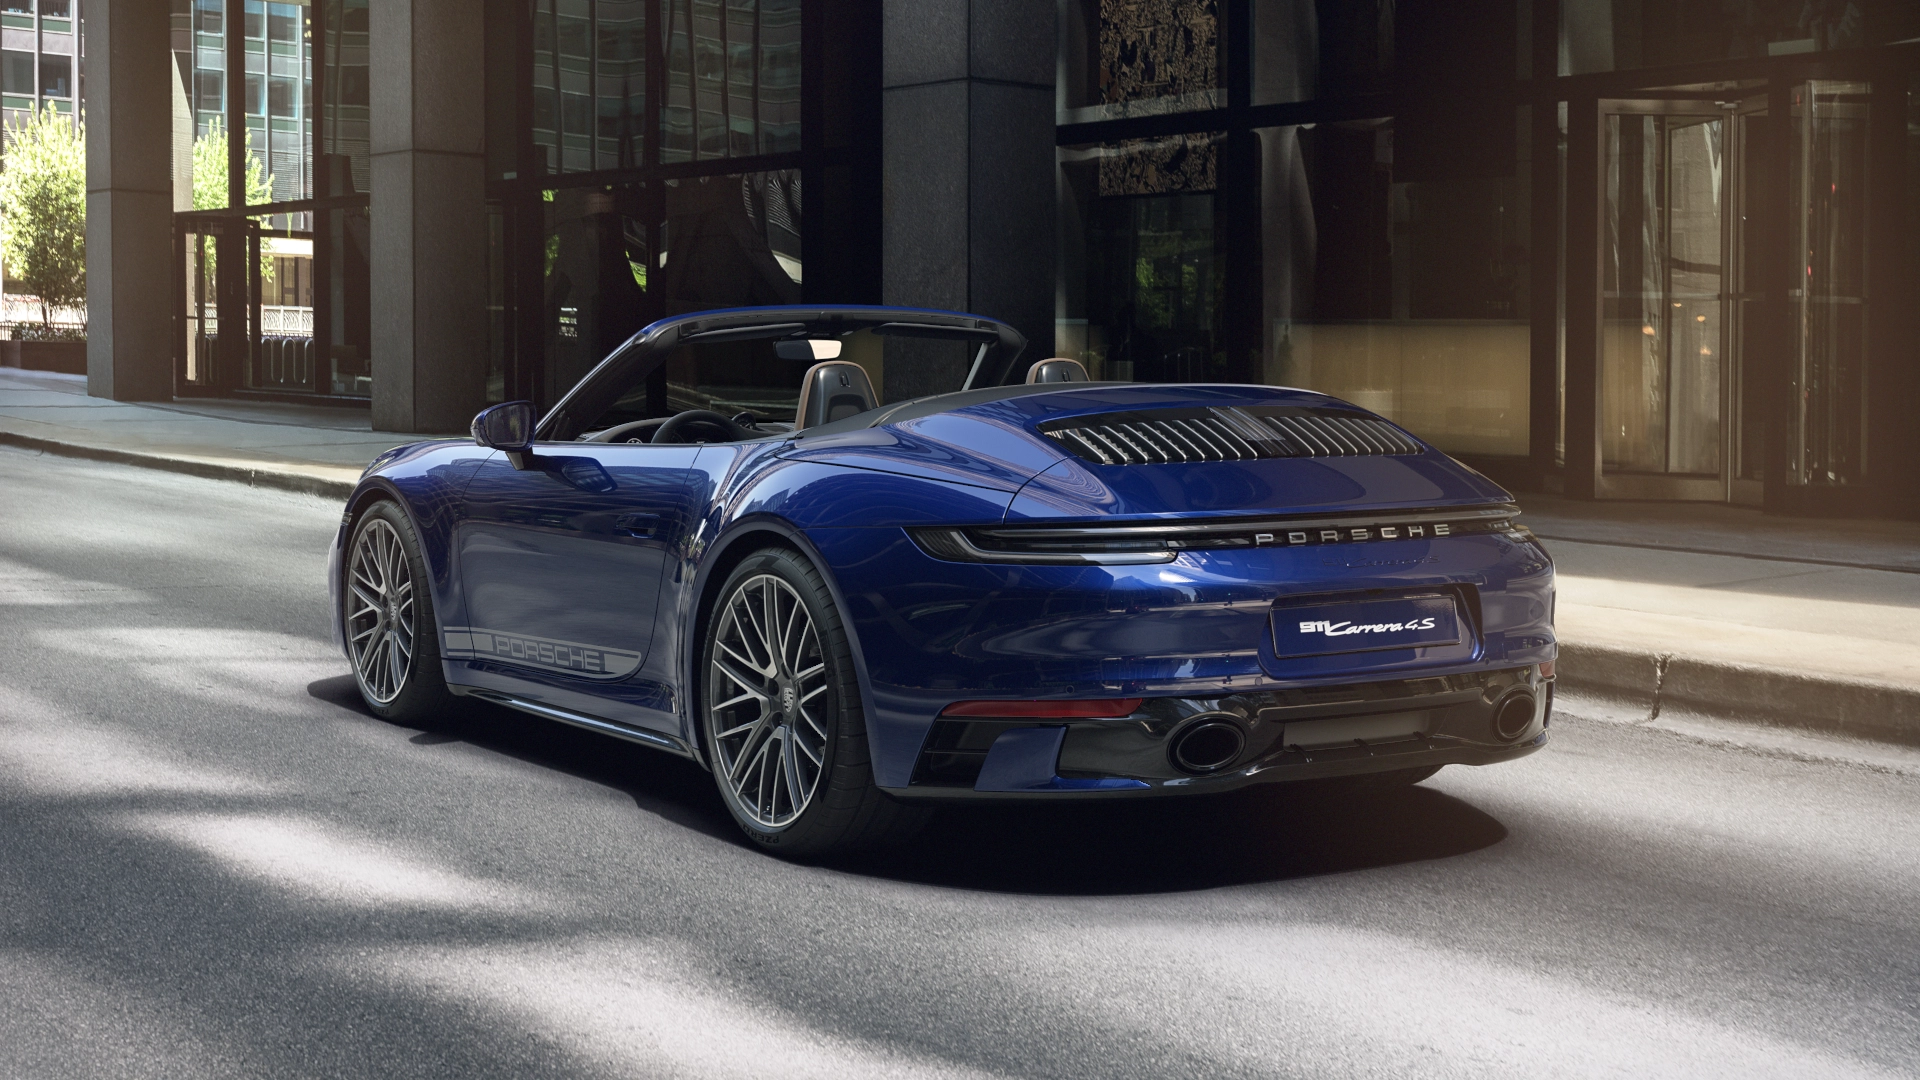 911 Carrera 4S Cabriolet back view